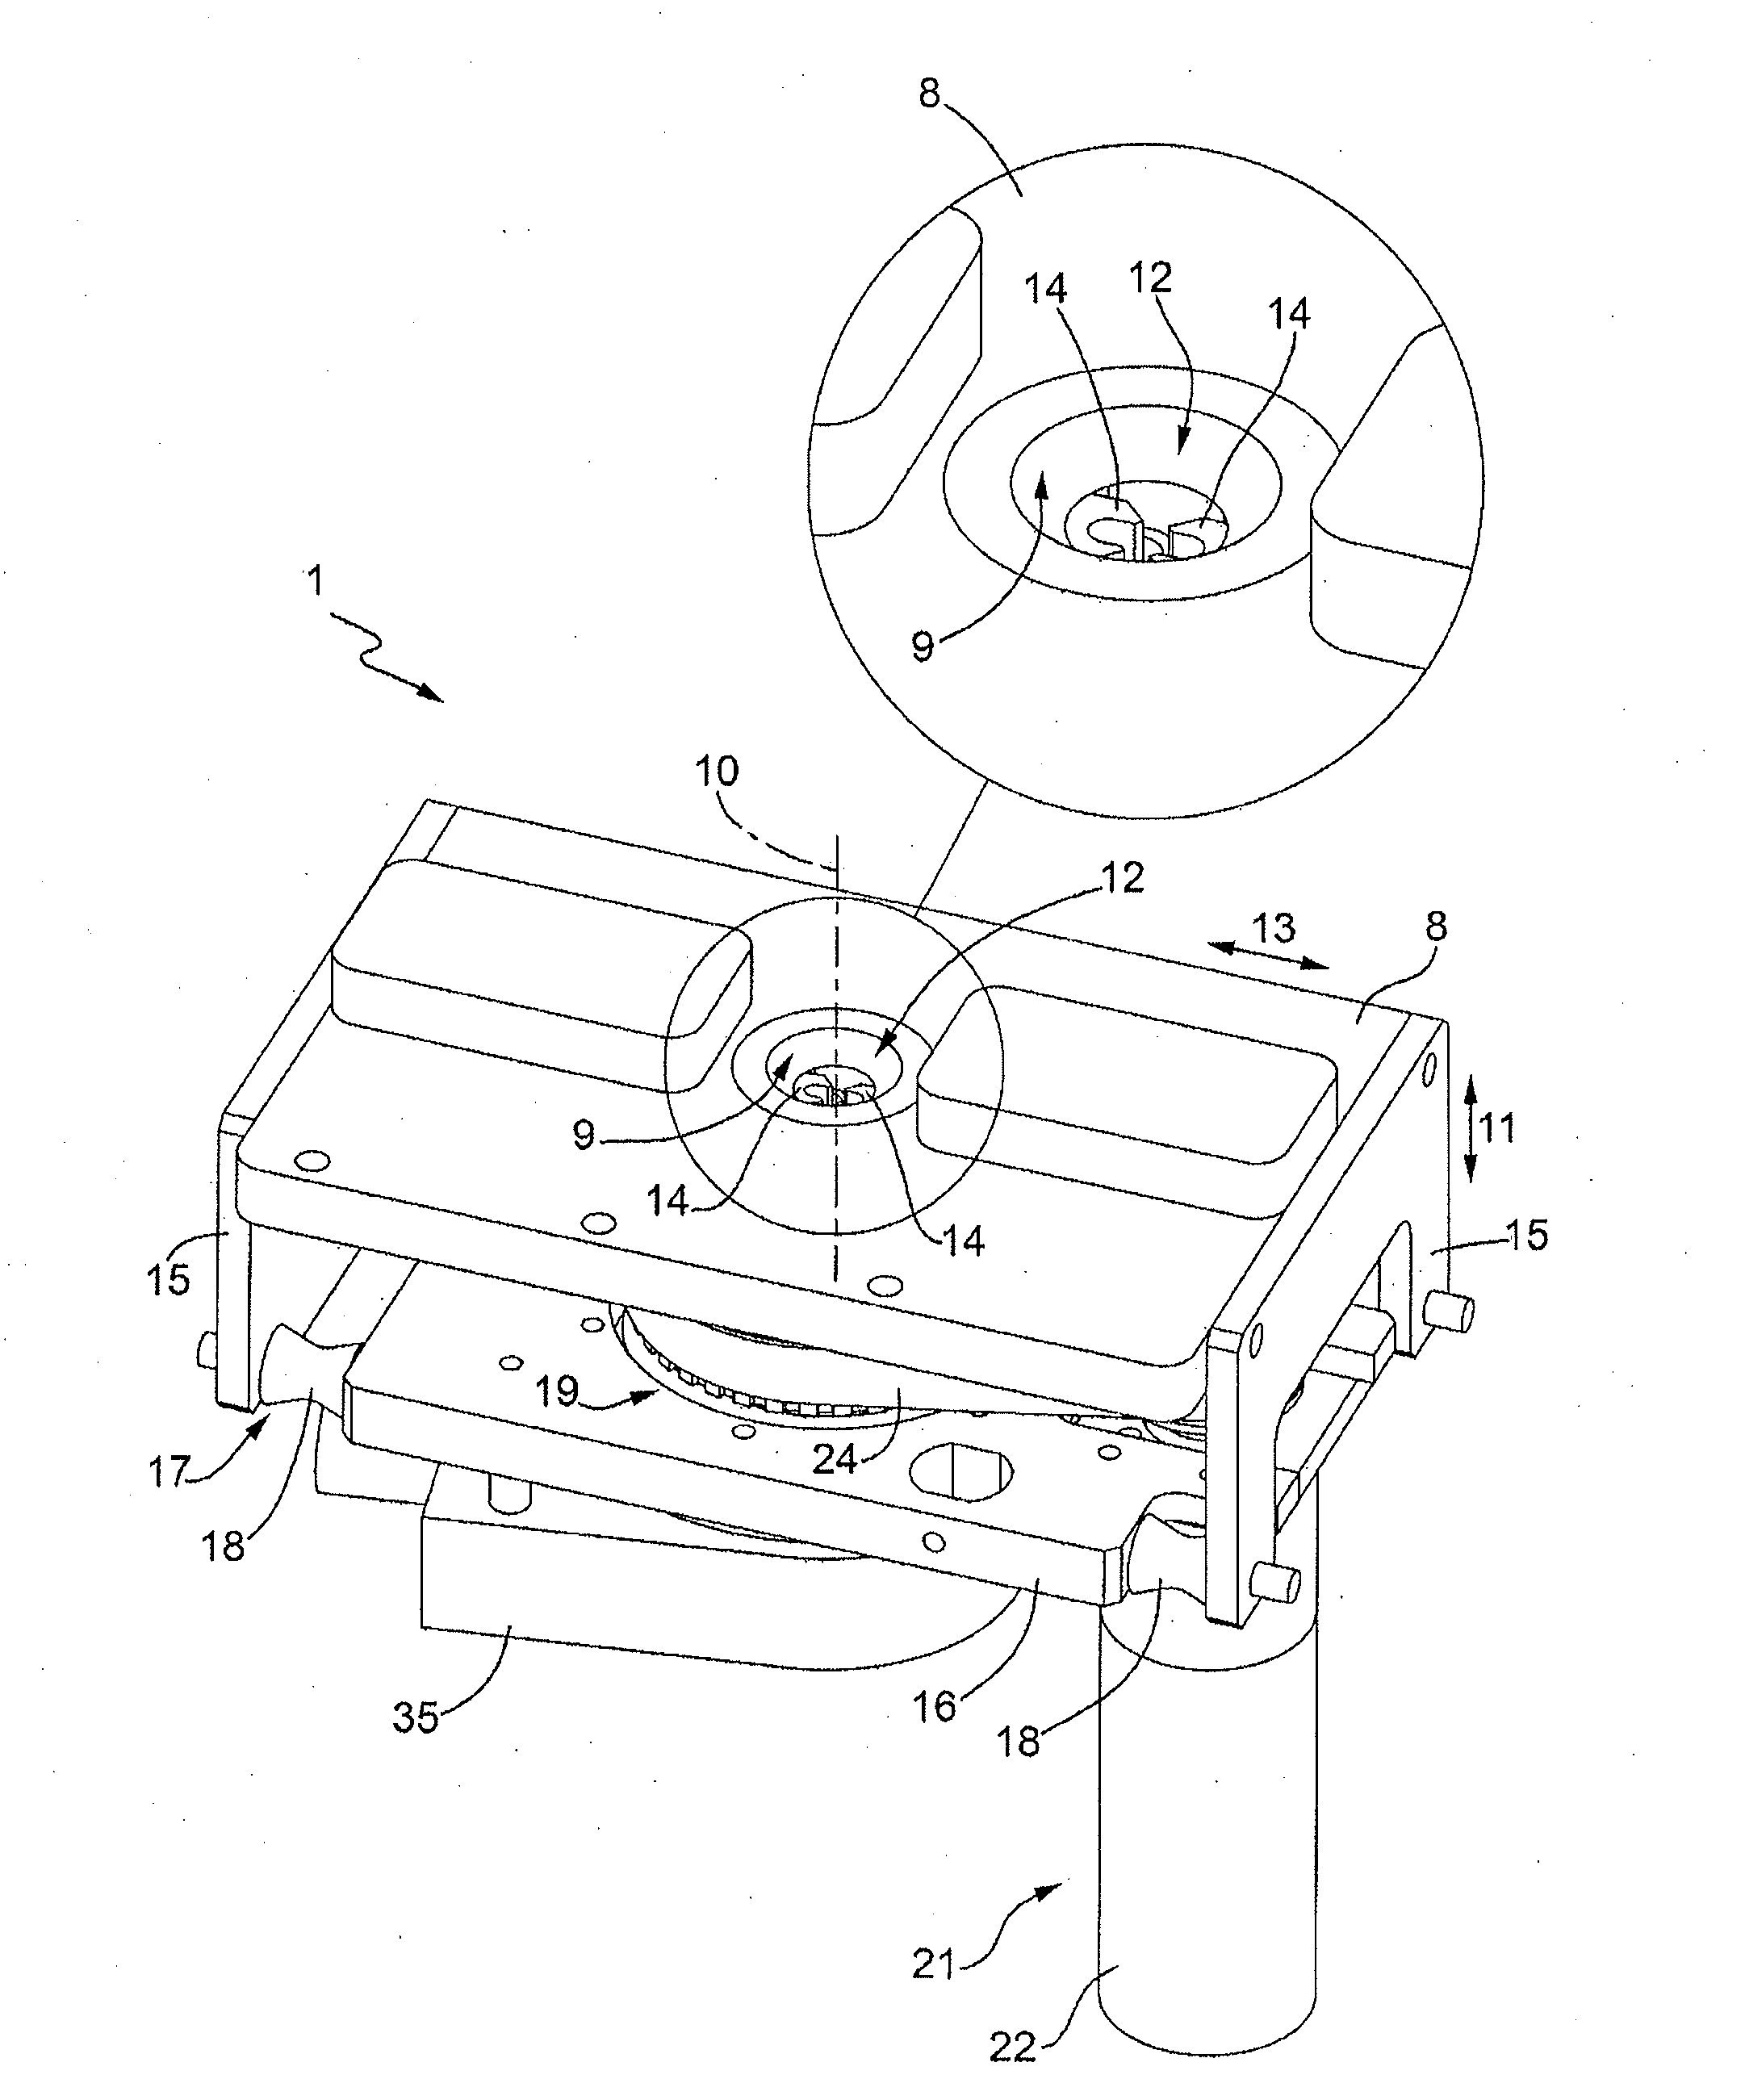 Apparatus for the Removal of Needles of Syringes